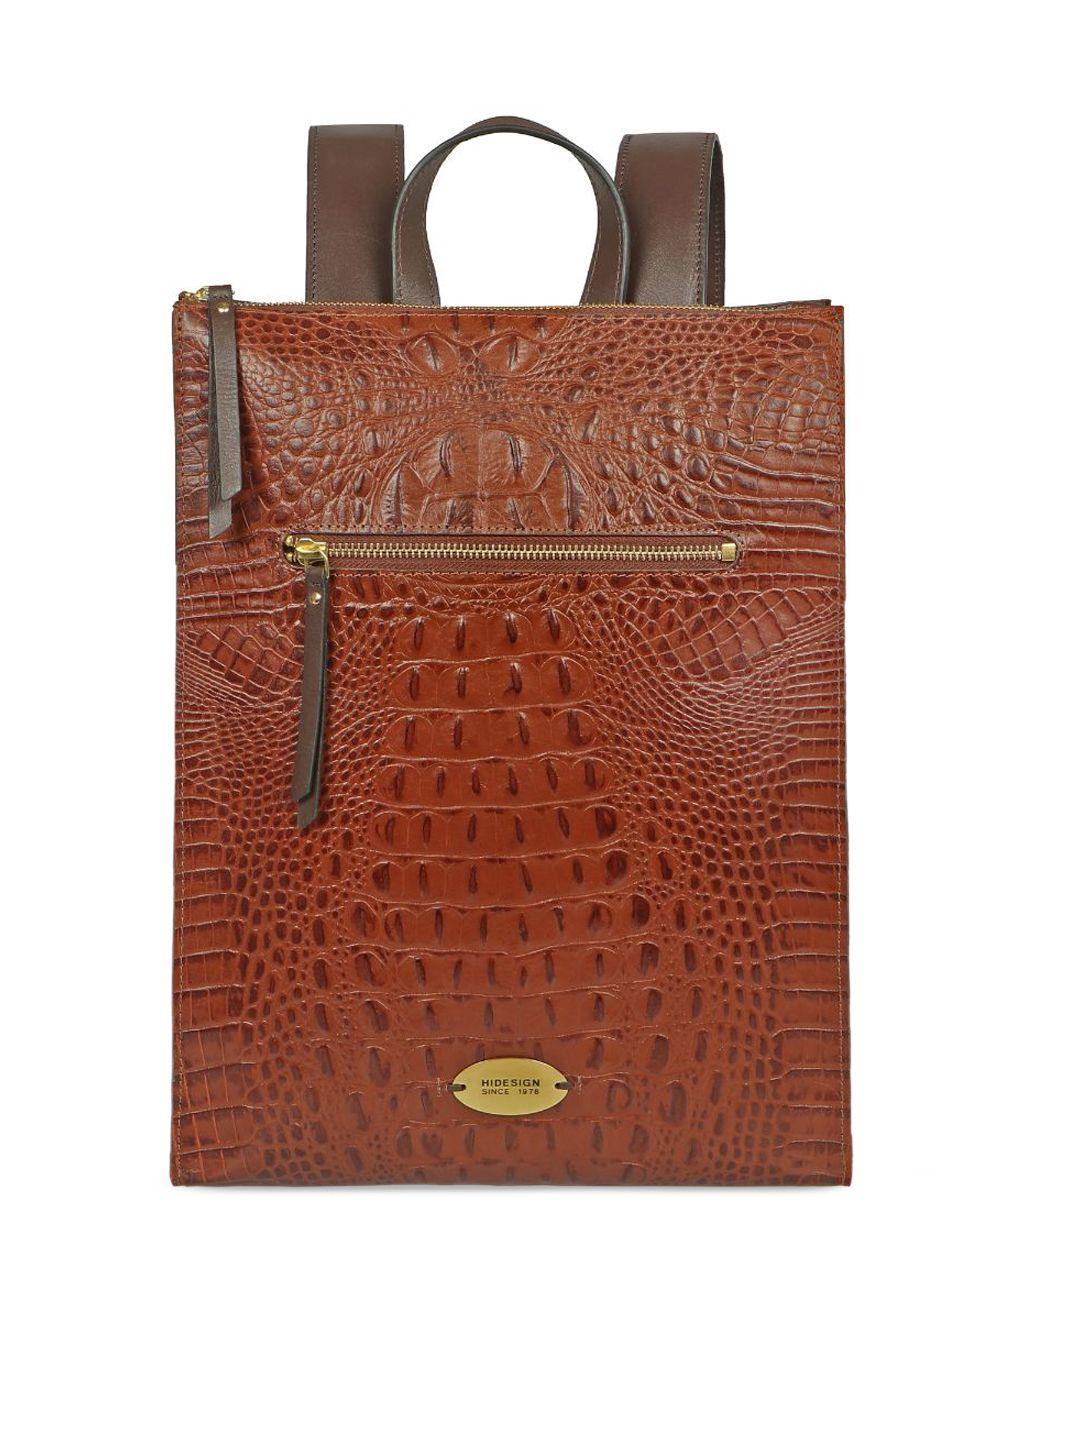 hidesign animal textured leather structured back bag